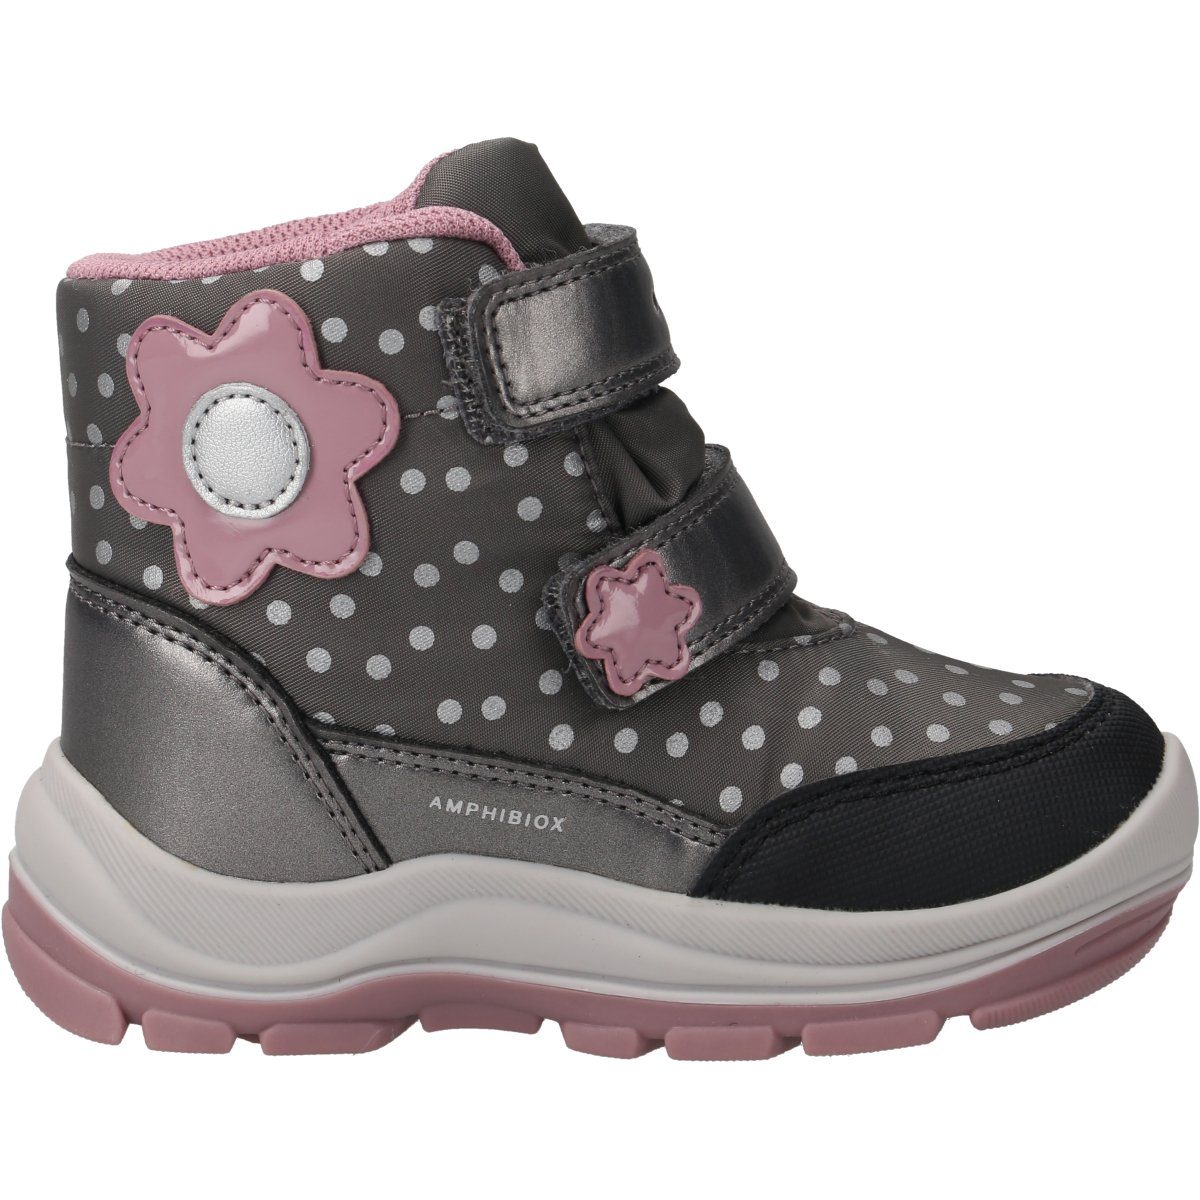 Sommerboots Geox FLANFIL